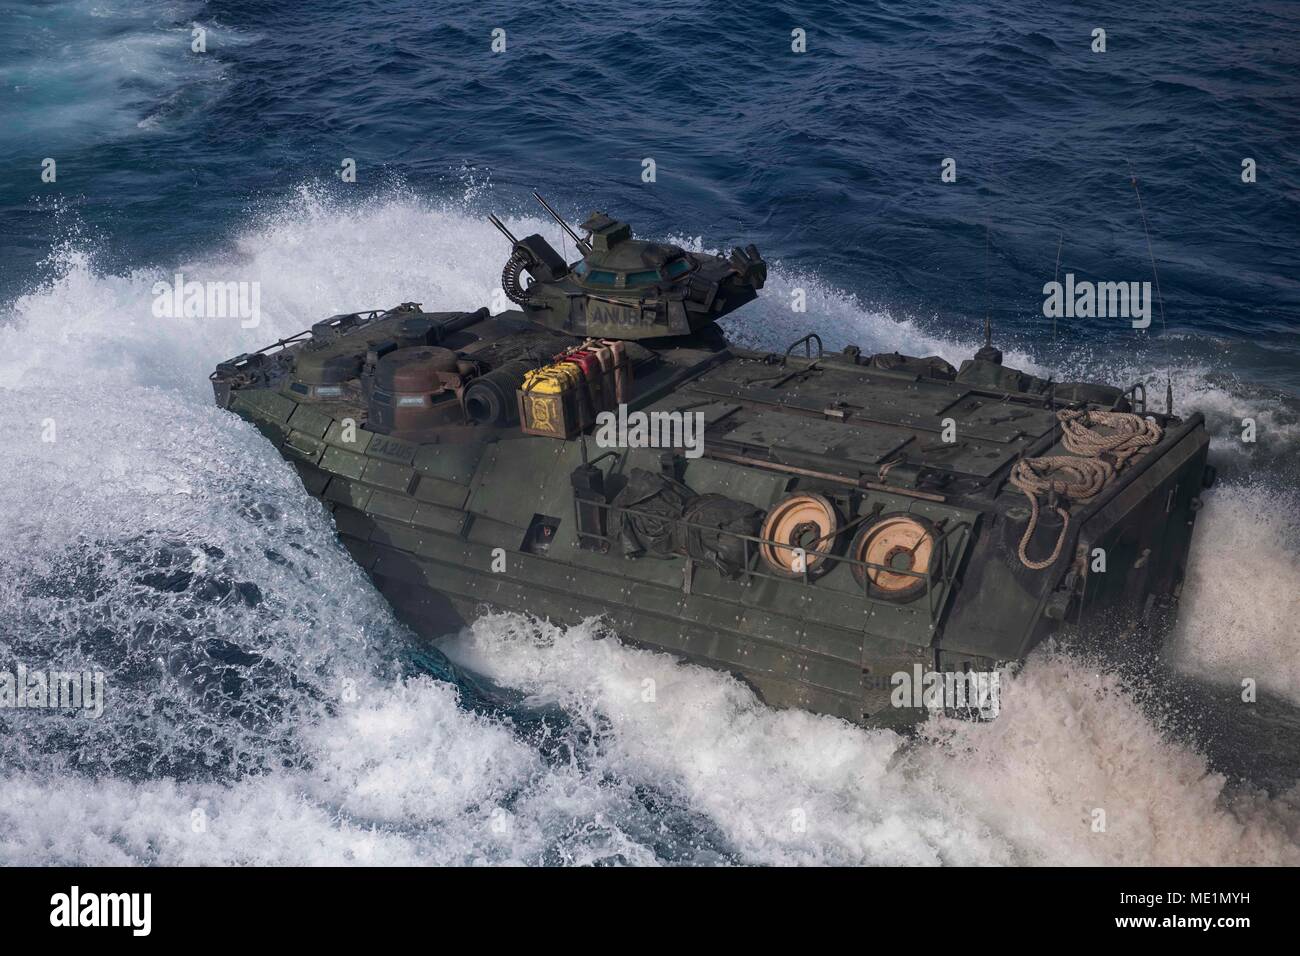 180418-N-TJ319-0049  U.S. 5TH FLEET AREA OF OPERATIONS (April 18, 2018) An AAV-P7/A1 assault amphibious vehicle assigned to the 26th Marine Expeditionary Unit departs the well deck of the Harpers Ferry-class dock landing ship USS Oak Hill (LSD 51) April 18, 2018. Oak Hill, home-ported in Virginia Beach, Virginia, is in the U.S. 5th Fleet area of operations participating in Eager Lion, a capstone training engagement that provides U.S. forces and the Jordan Armed Forces an opportunity to rehearse operations in a coalition environment and to pursue new ways to collectively address threats to regi Stock Photo